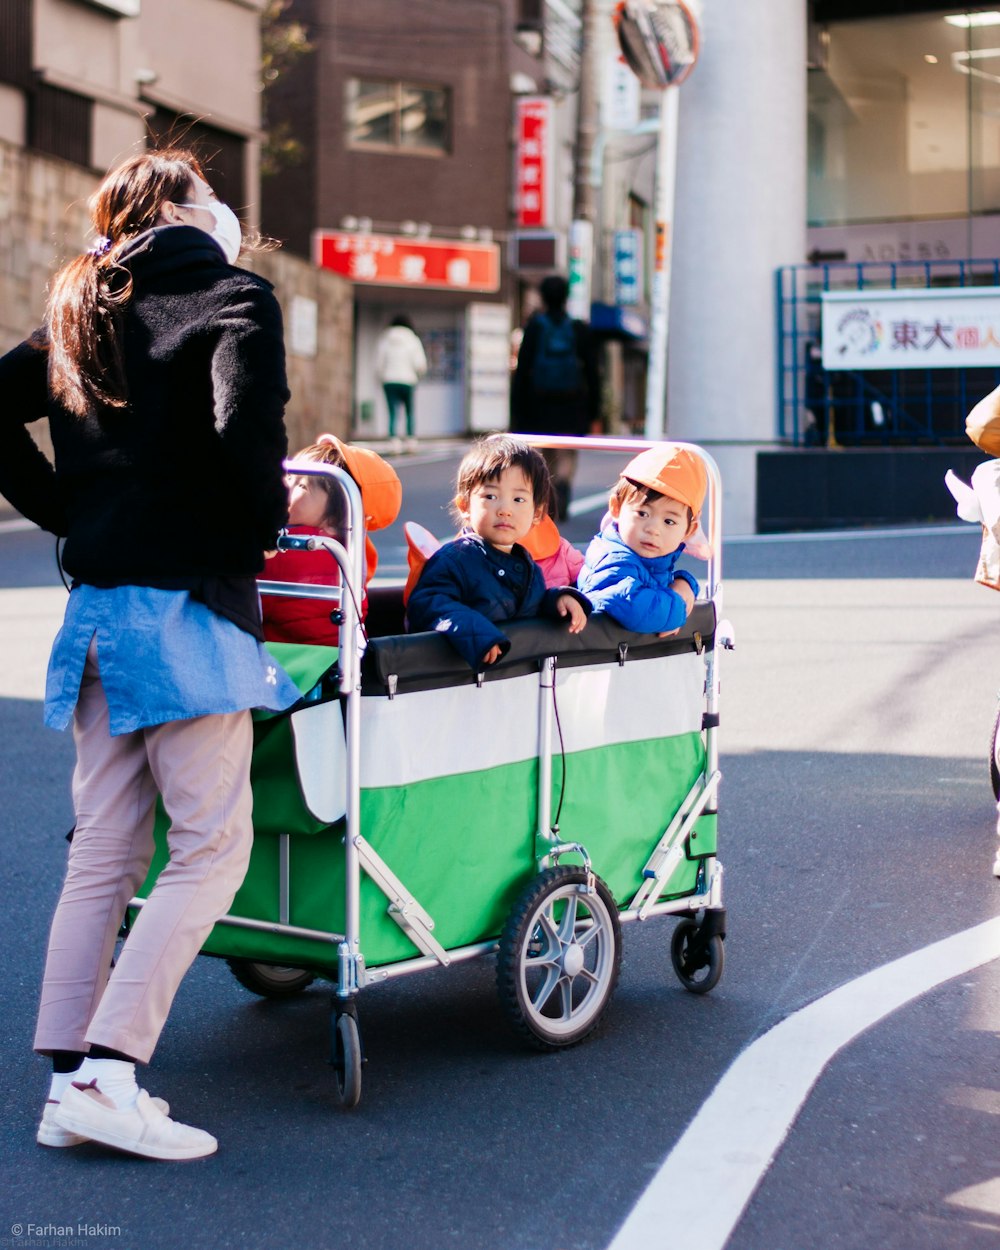 a woman pushing a cart with children in it